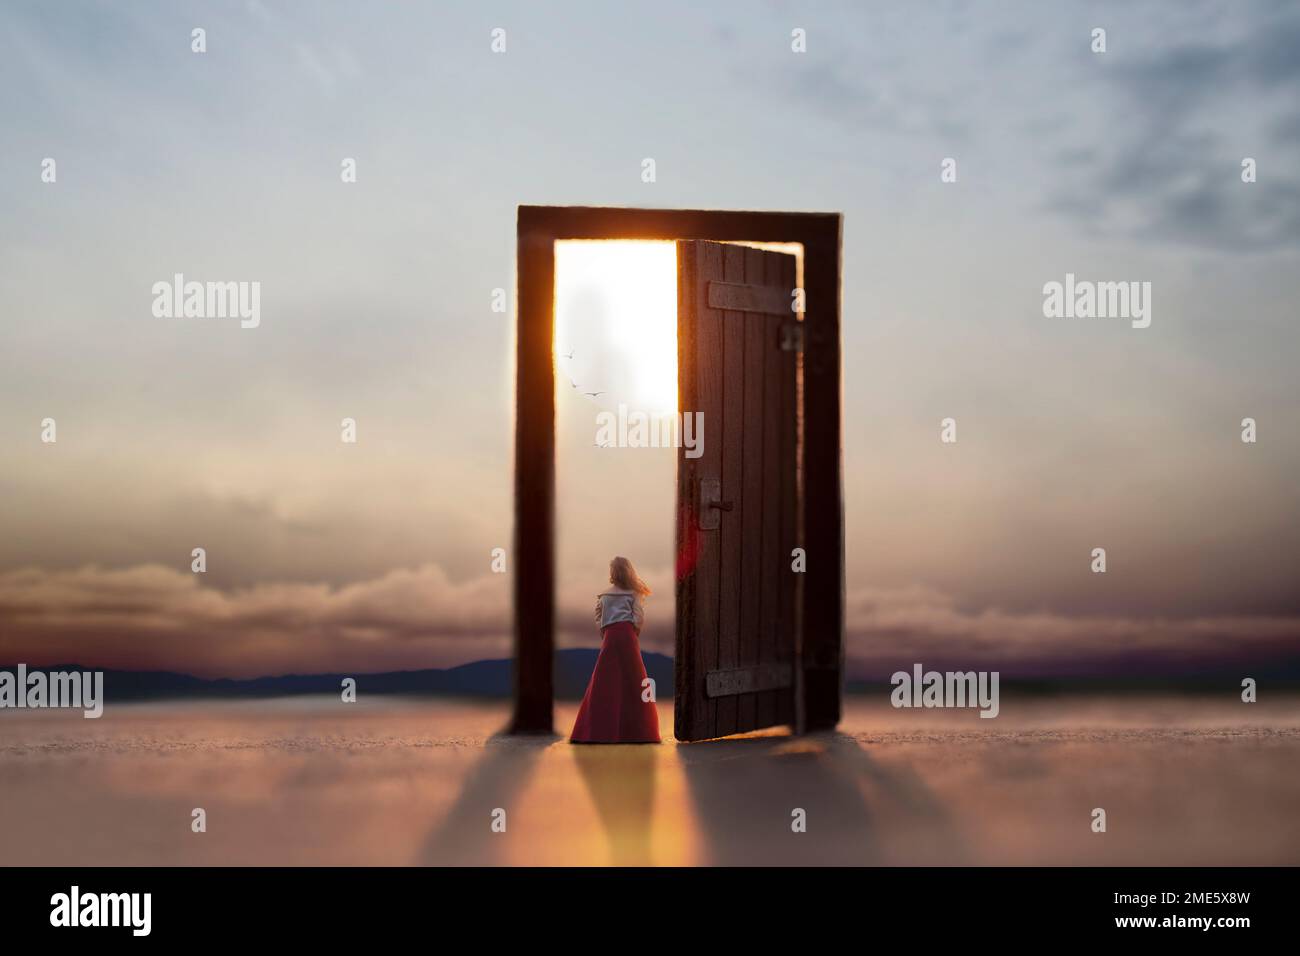 woman looking at the wonderful landscape on the doorstep of a surreal door Stock Photo